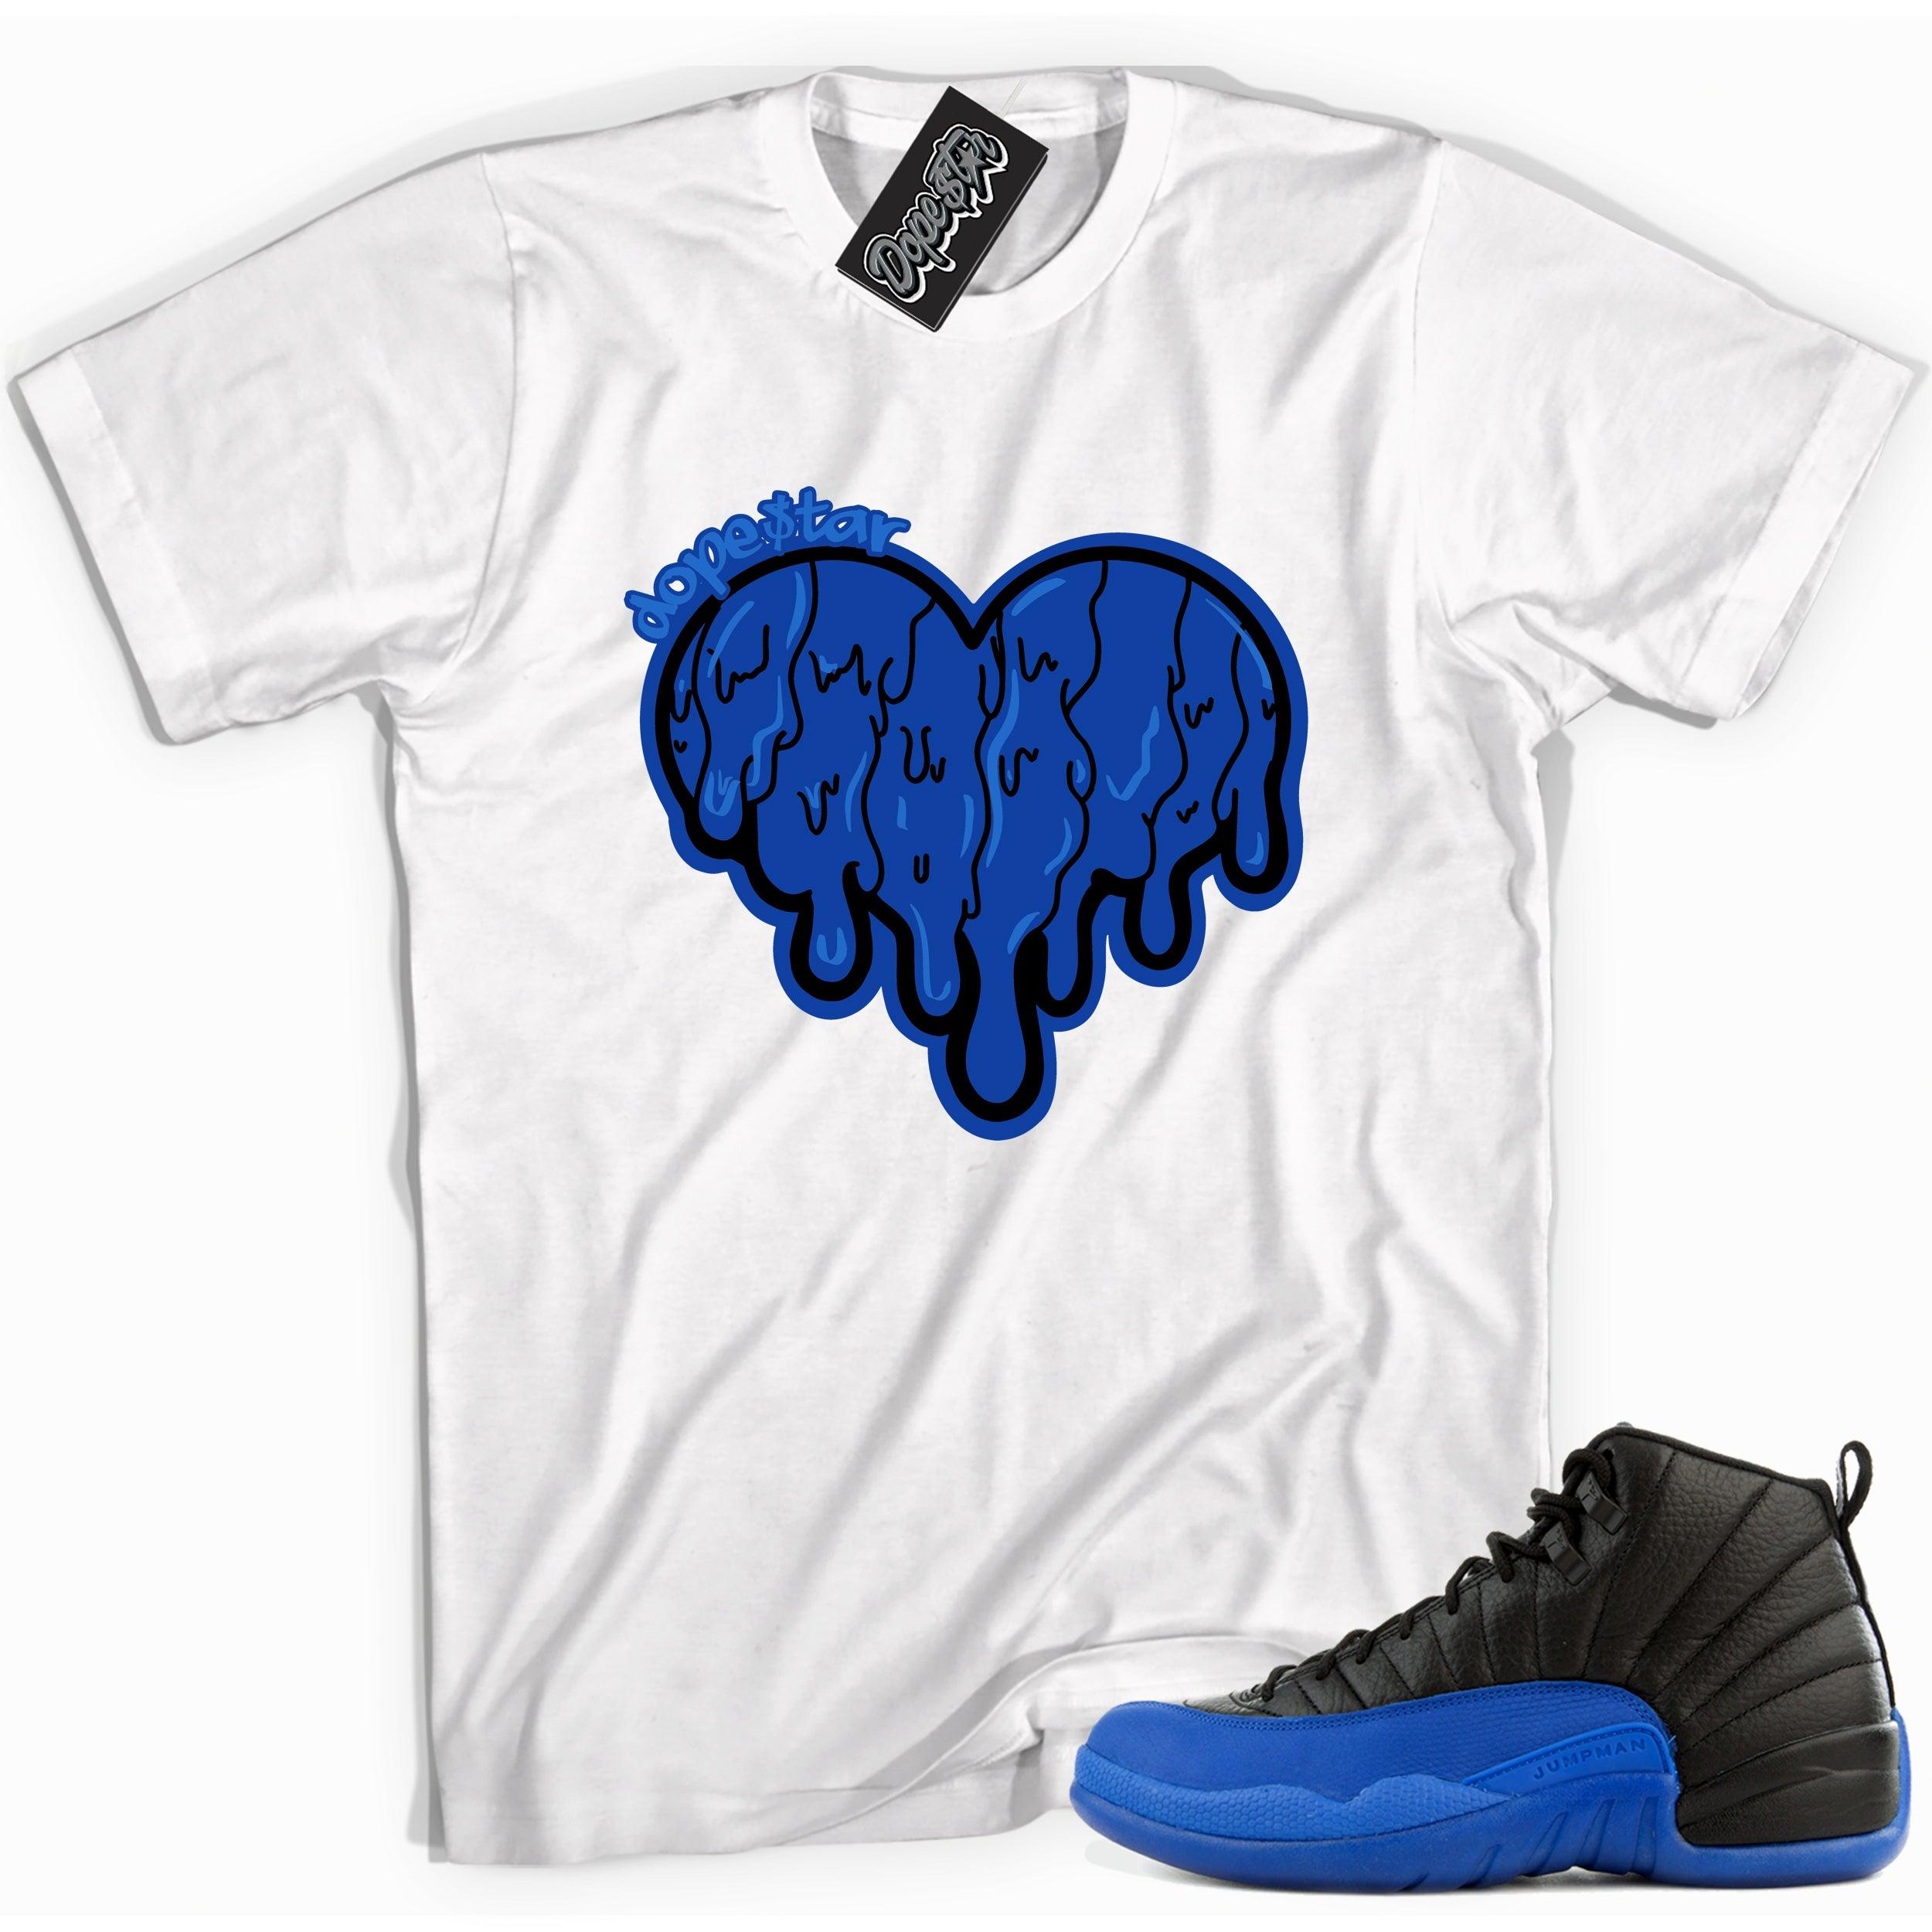 Cool white graphic tee with 'melting heart dopestar' print, that perfectly matches Air Jordan 12 Retro Black Game Royal sneakers.